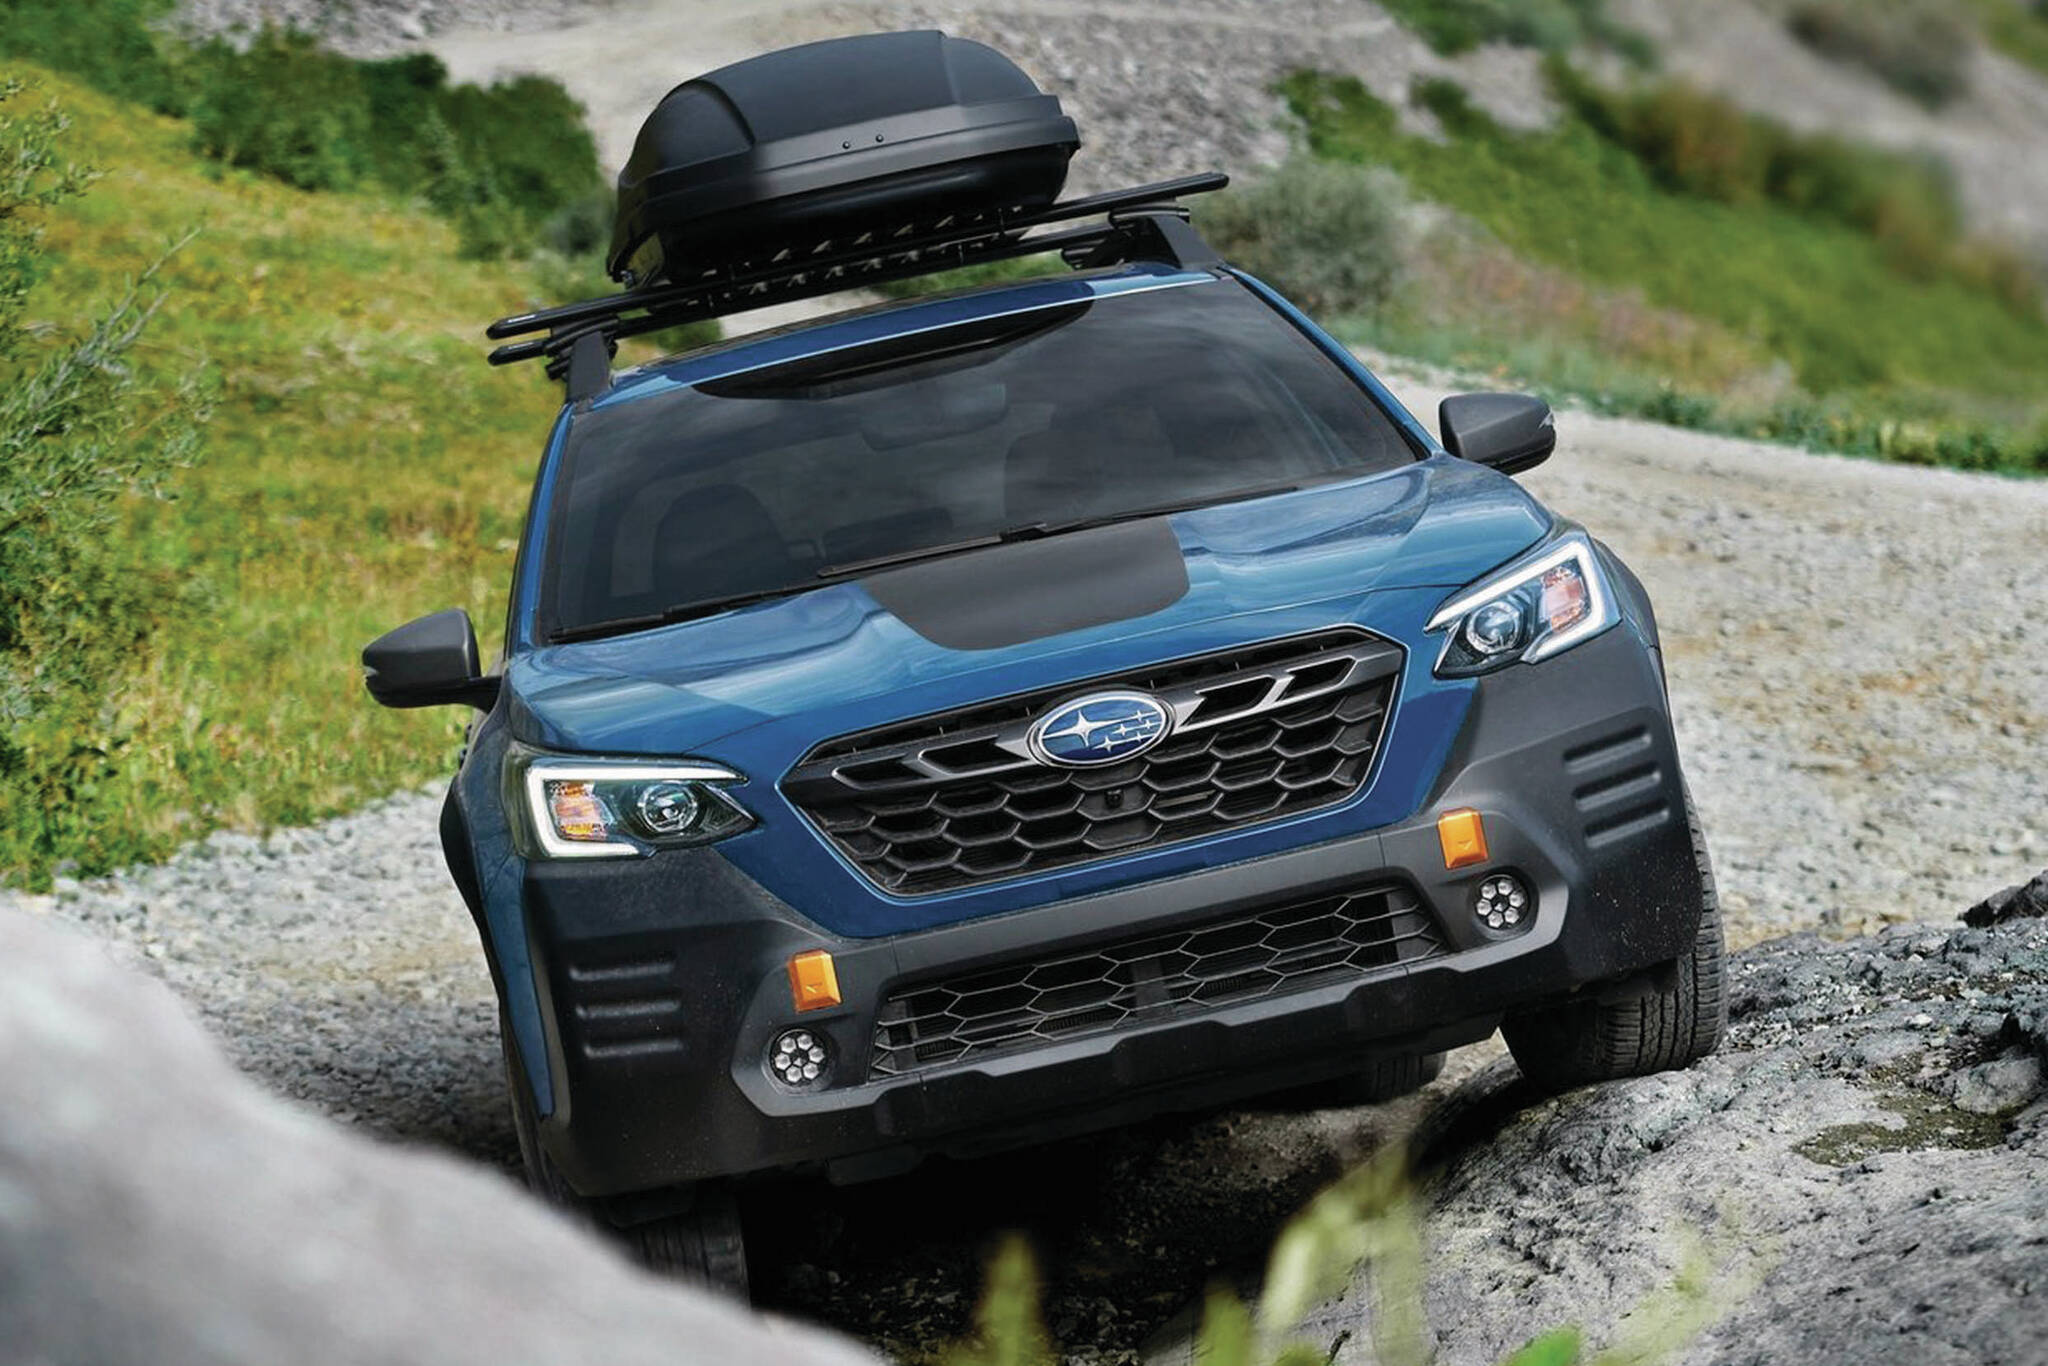 All Outback models get the 260-horsepower turbocharged 2.4-litre four-cylinder engine and continuously variable transmission. PHOTO: SUBARU